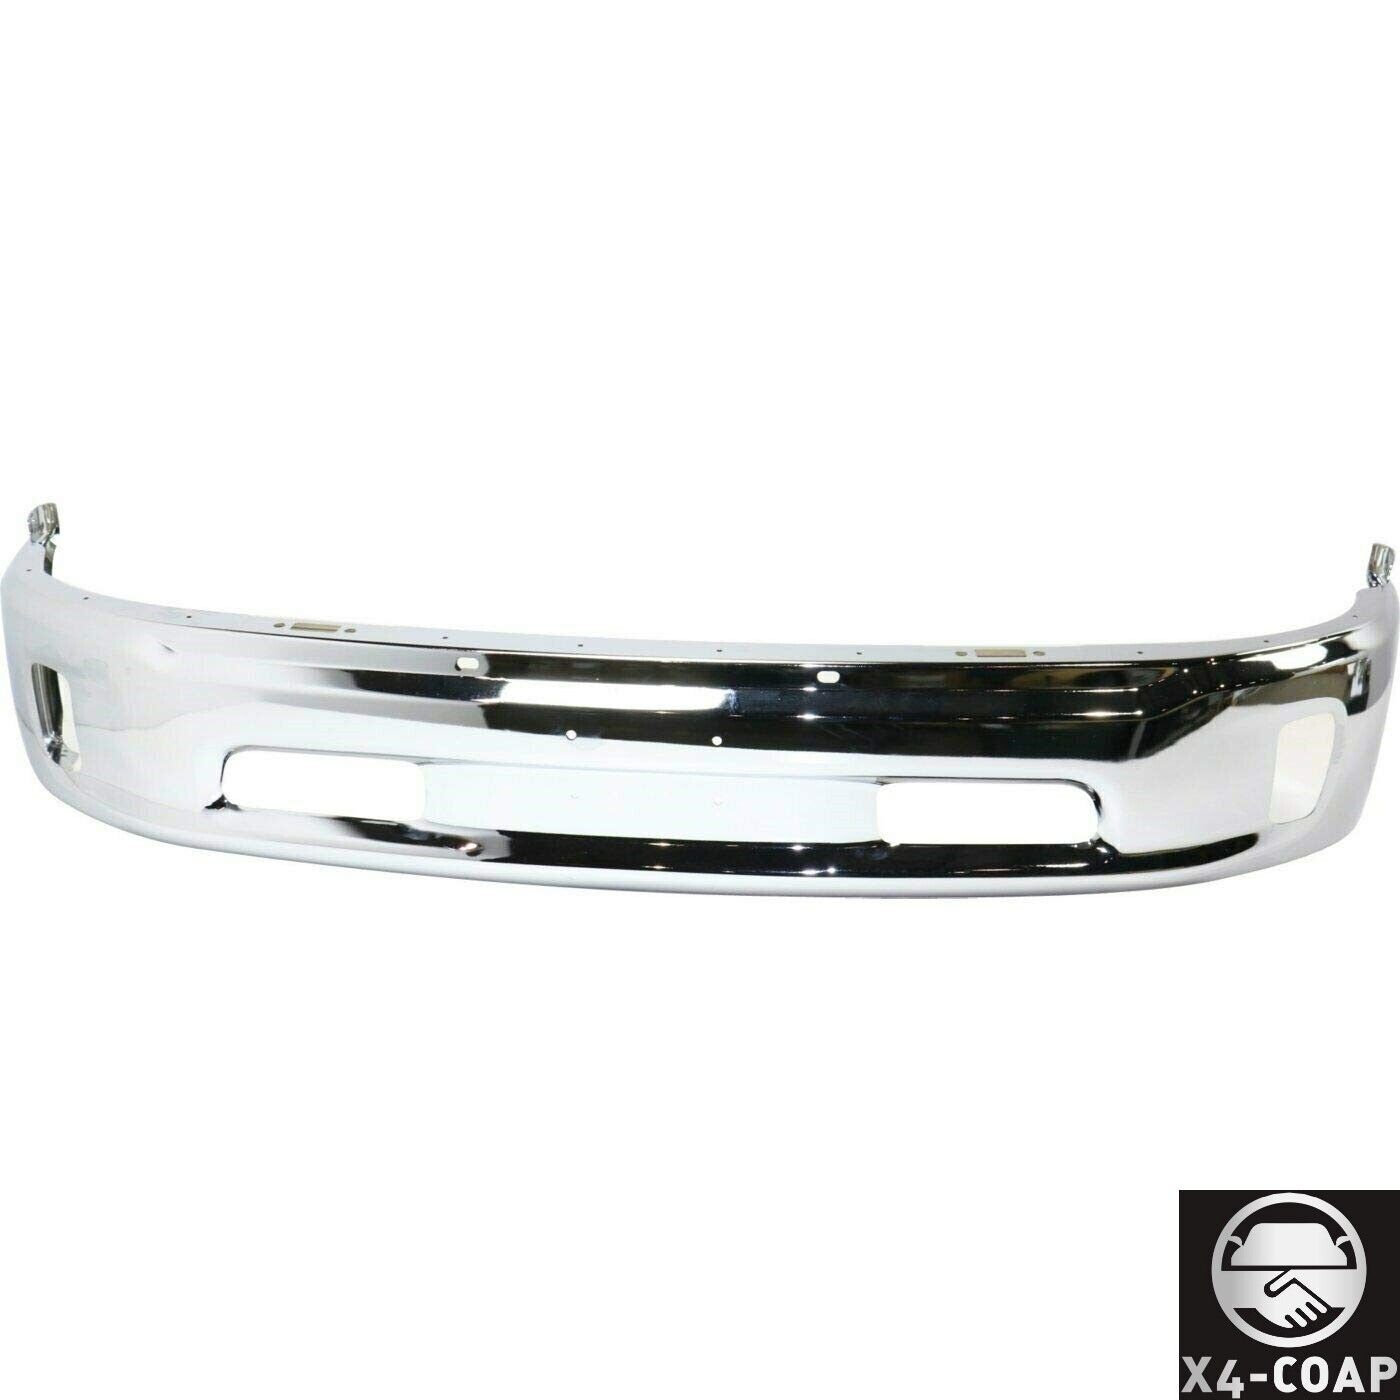 Chrome Front Bumper Face Bar For Dodge Ram Pickup 1500 13-18 With Fog Lamp Hole